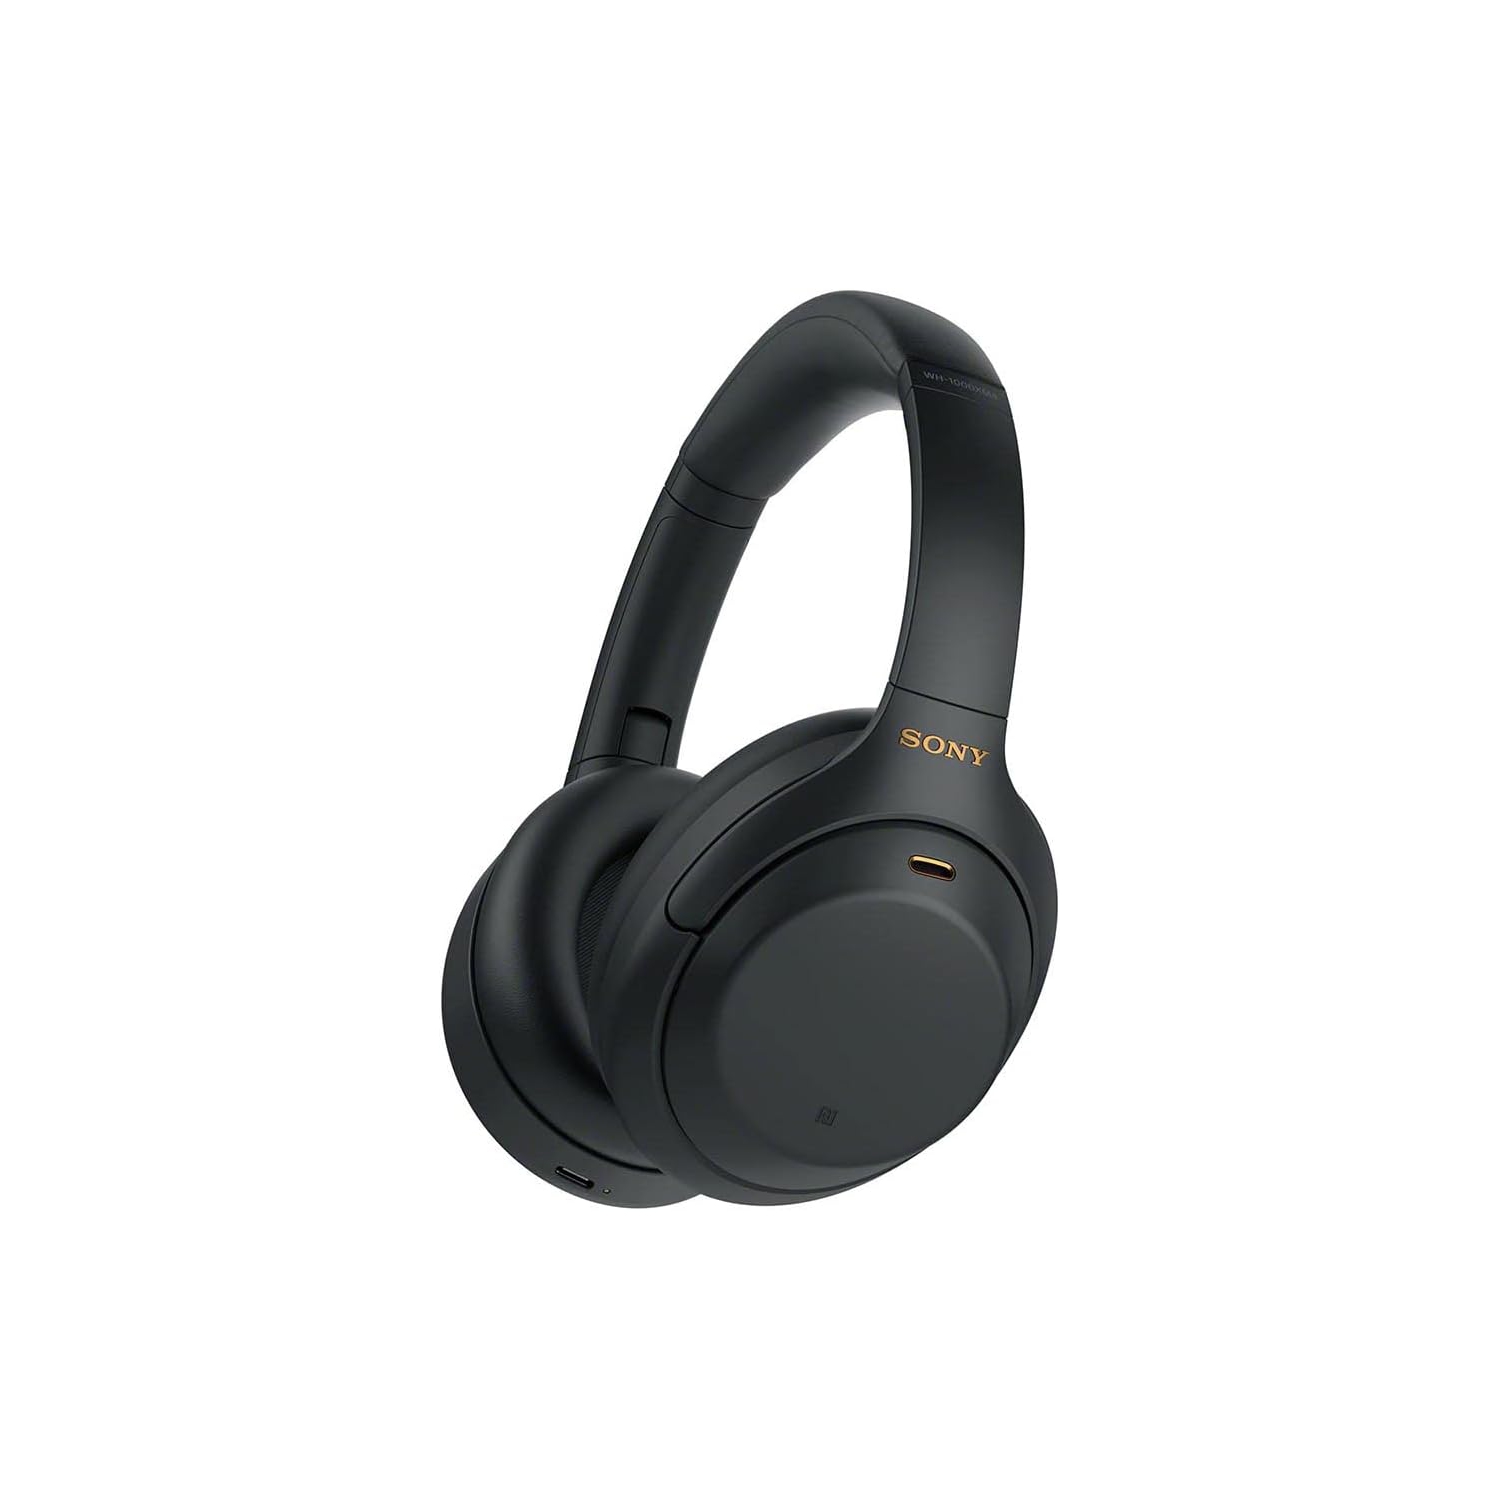 Refurbished (Excellent) - Sony WH-1000XM4 Over-Ear Noise Cancelling Bluetooth Headphones - Black